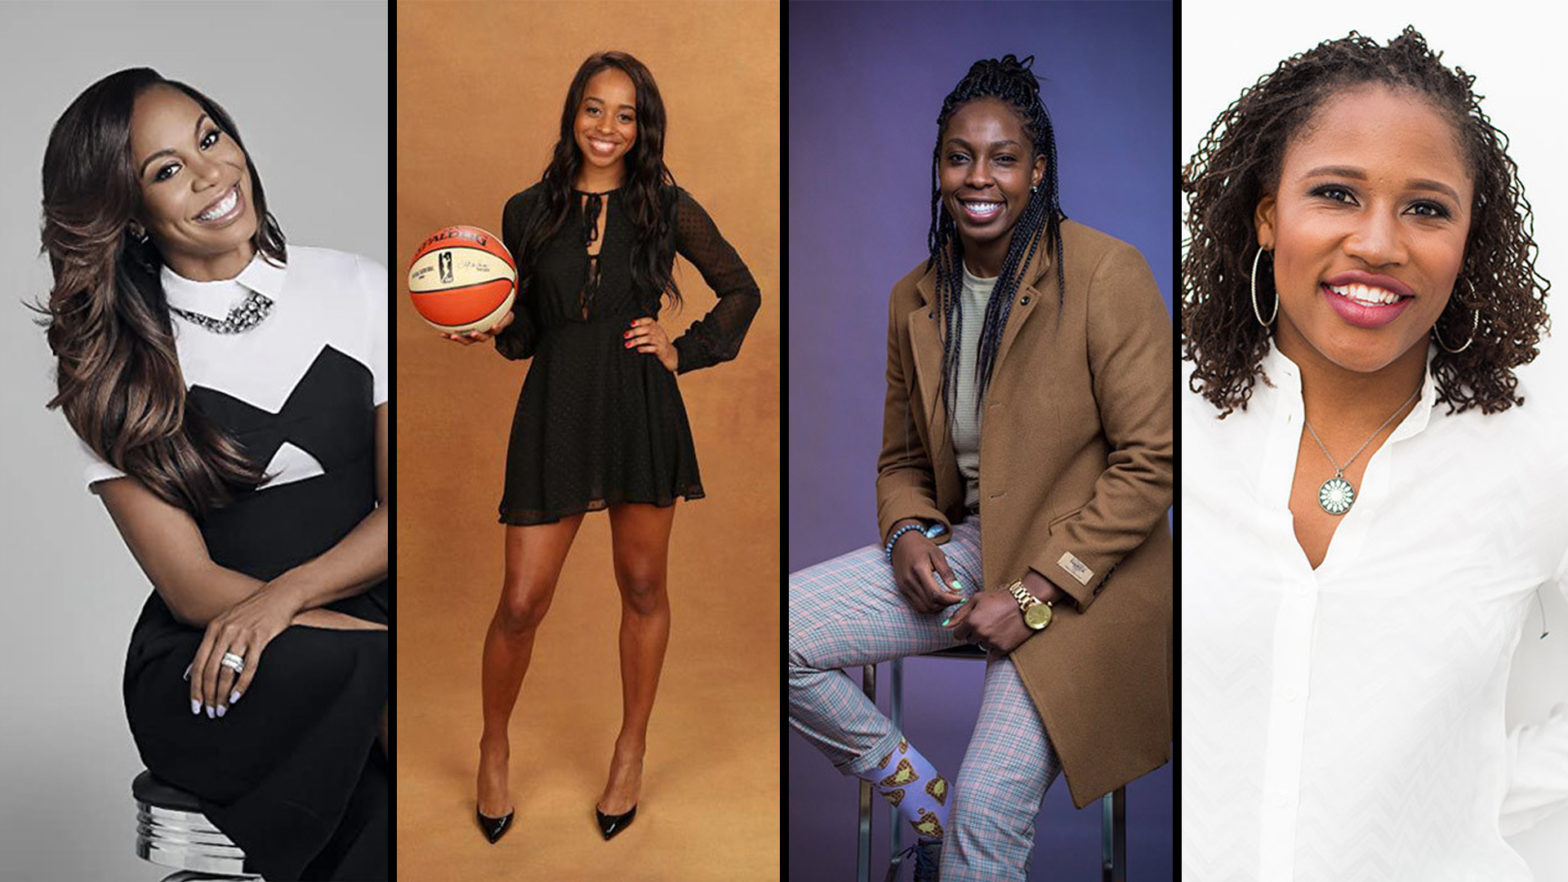 Debut Capital Launches Investor-In-Residence Program With An Inaugural Class Of Women Athletes